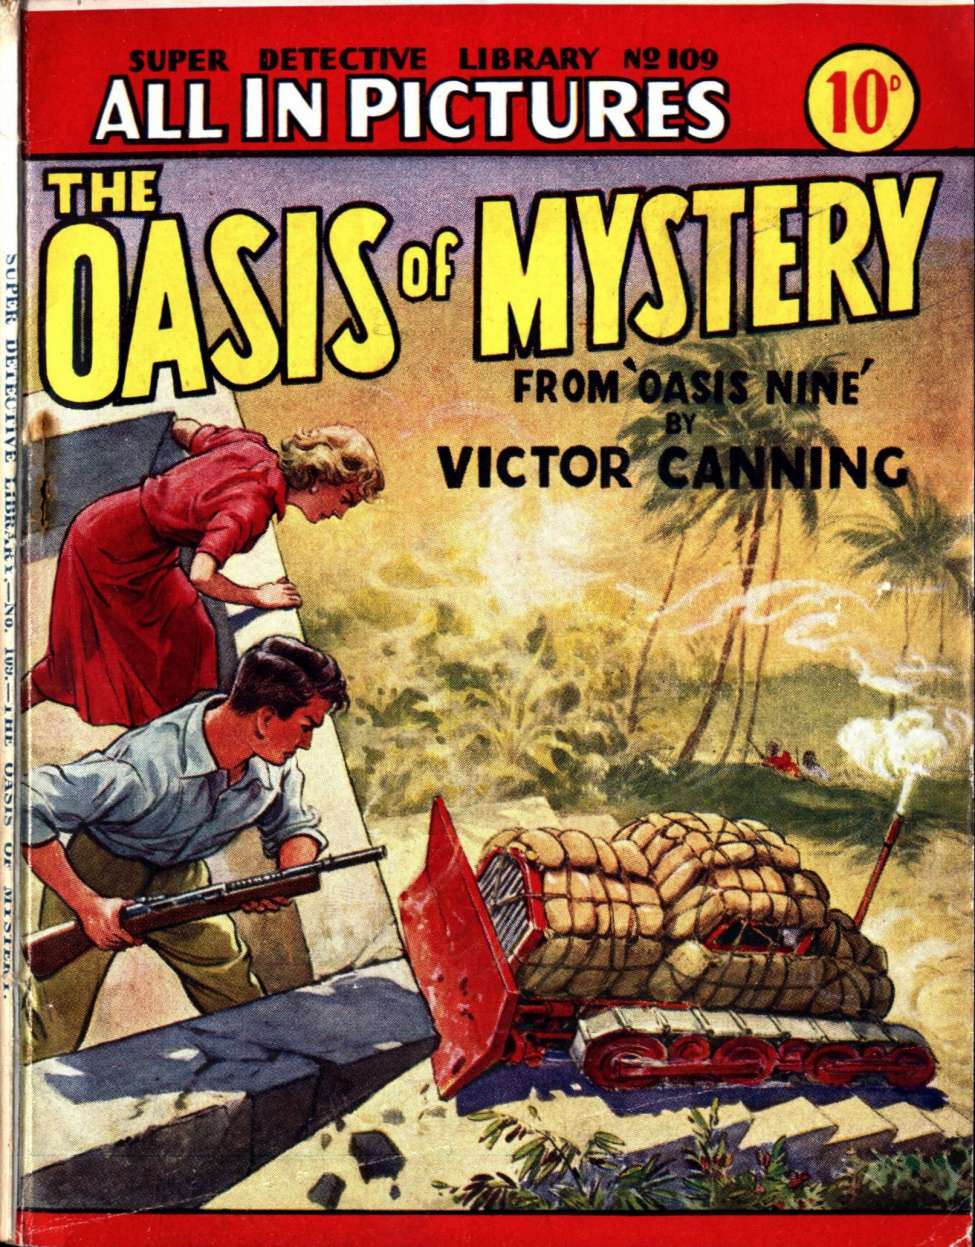 Book Cover For Super Detective Library 109 - The Oasis of Mystery